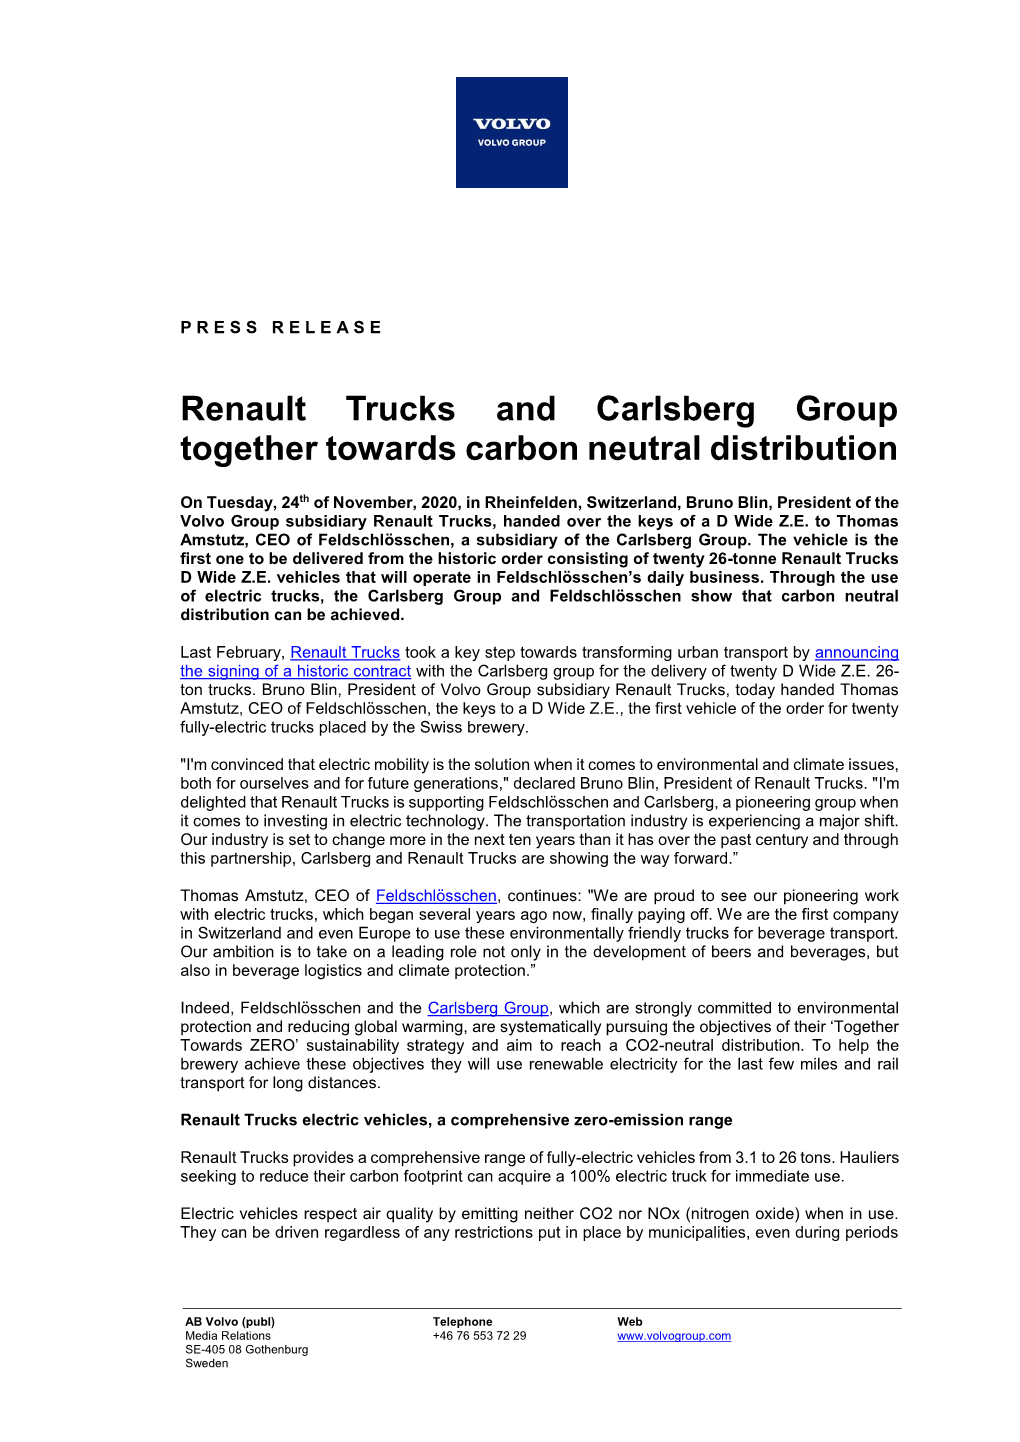 Renault Trucks and Carlsberg Group Together Towards Carbon Neutral Distribution